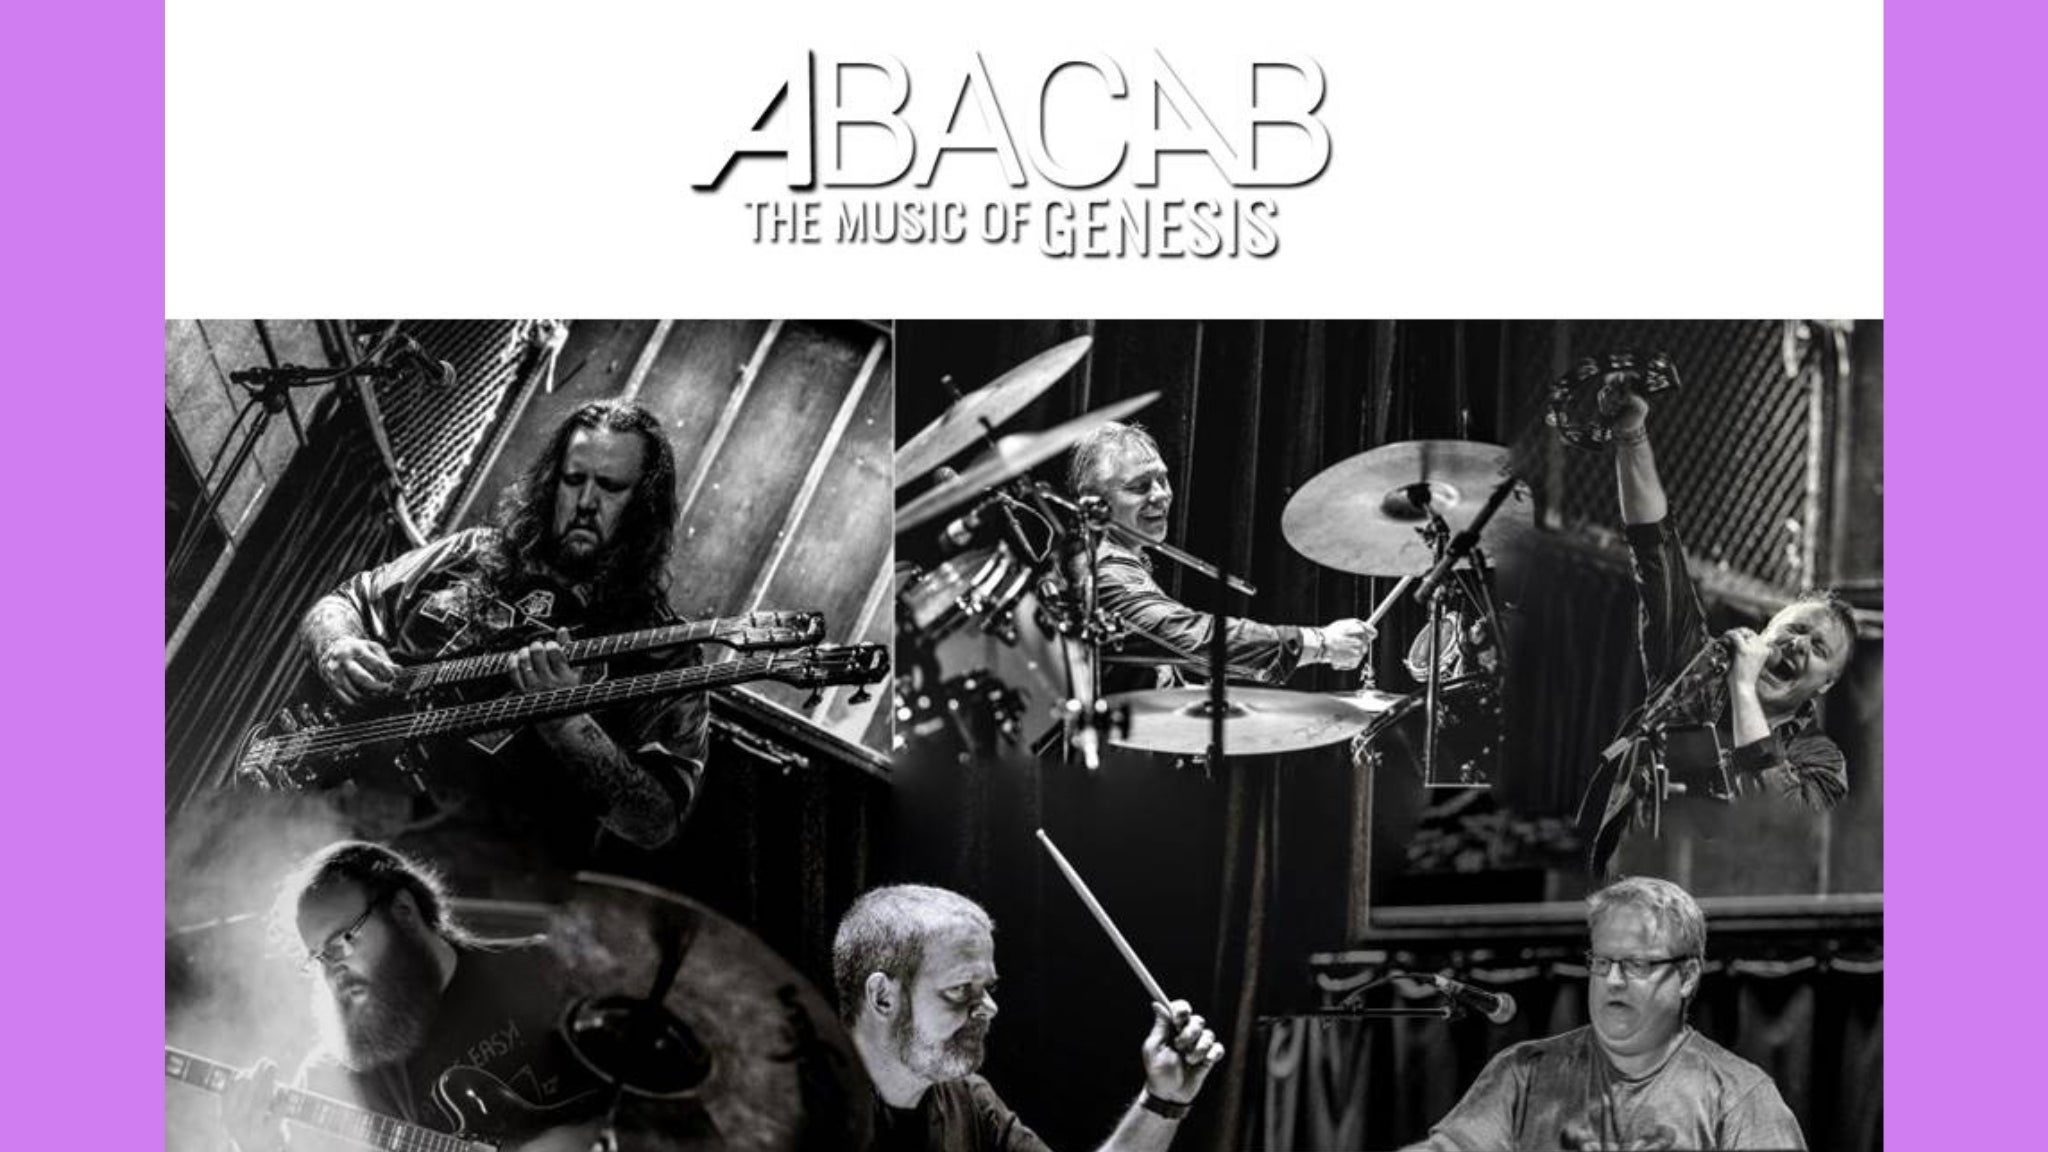 Abacab - The Music of Genesis at Elevation 27